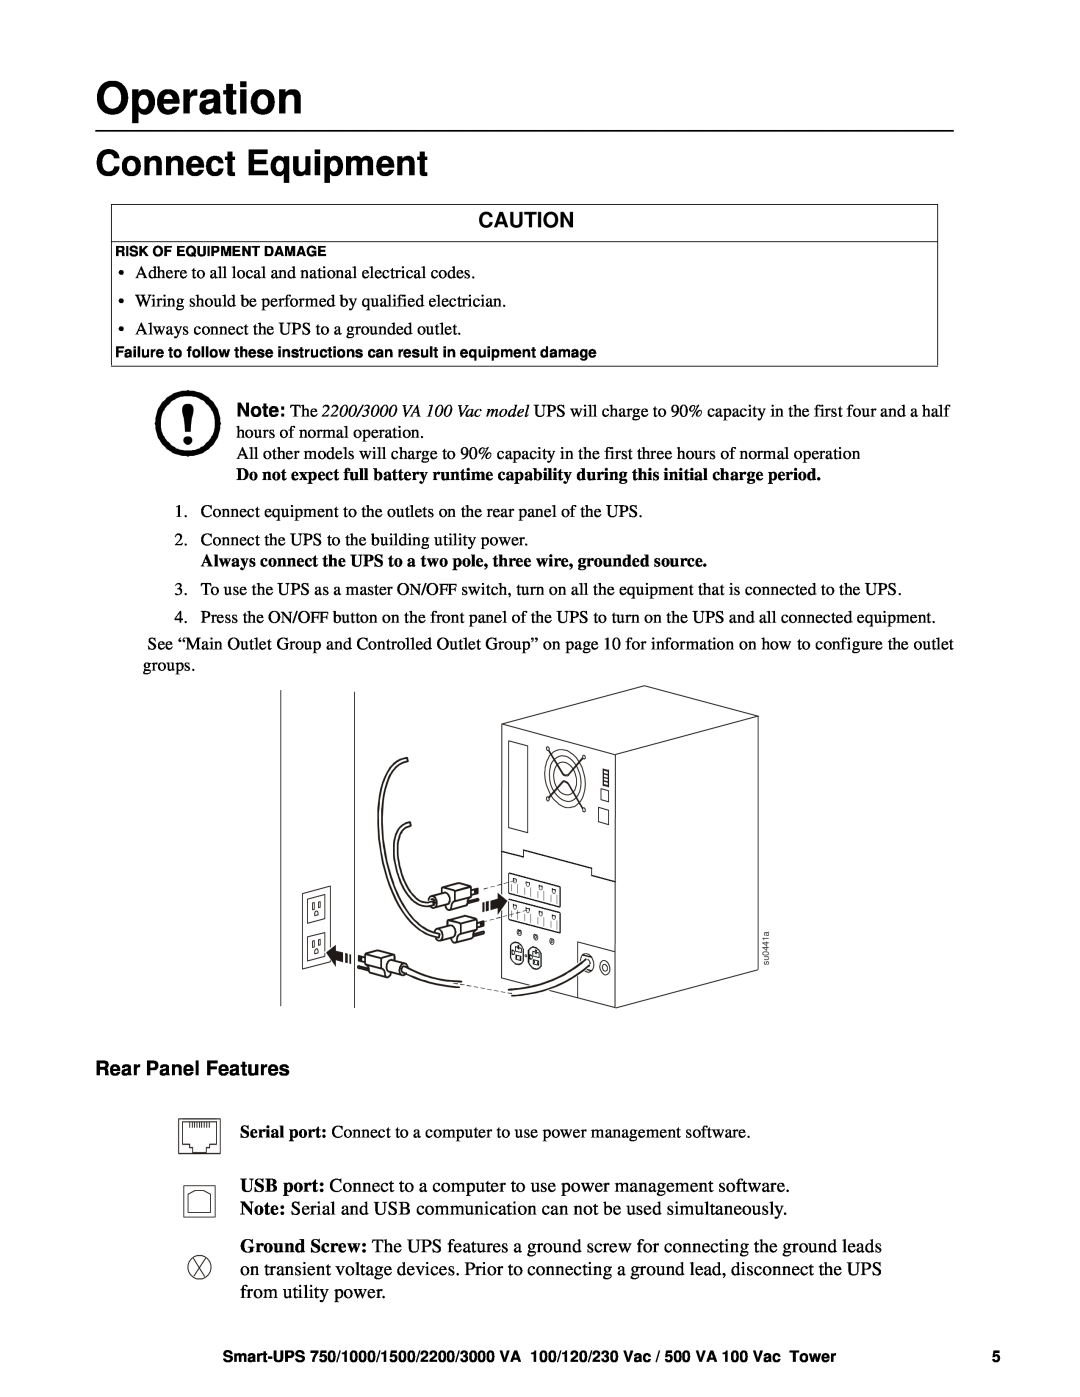 TRENDnet SMT1000 operation manual Operation, Connect Equipment 